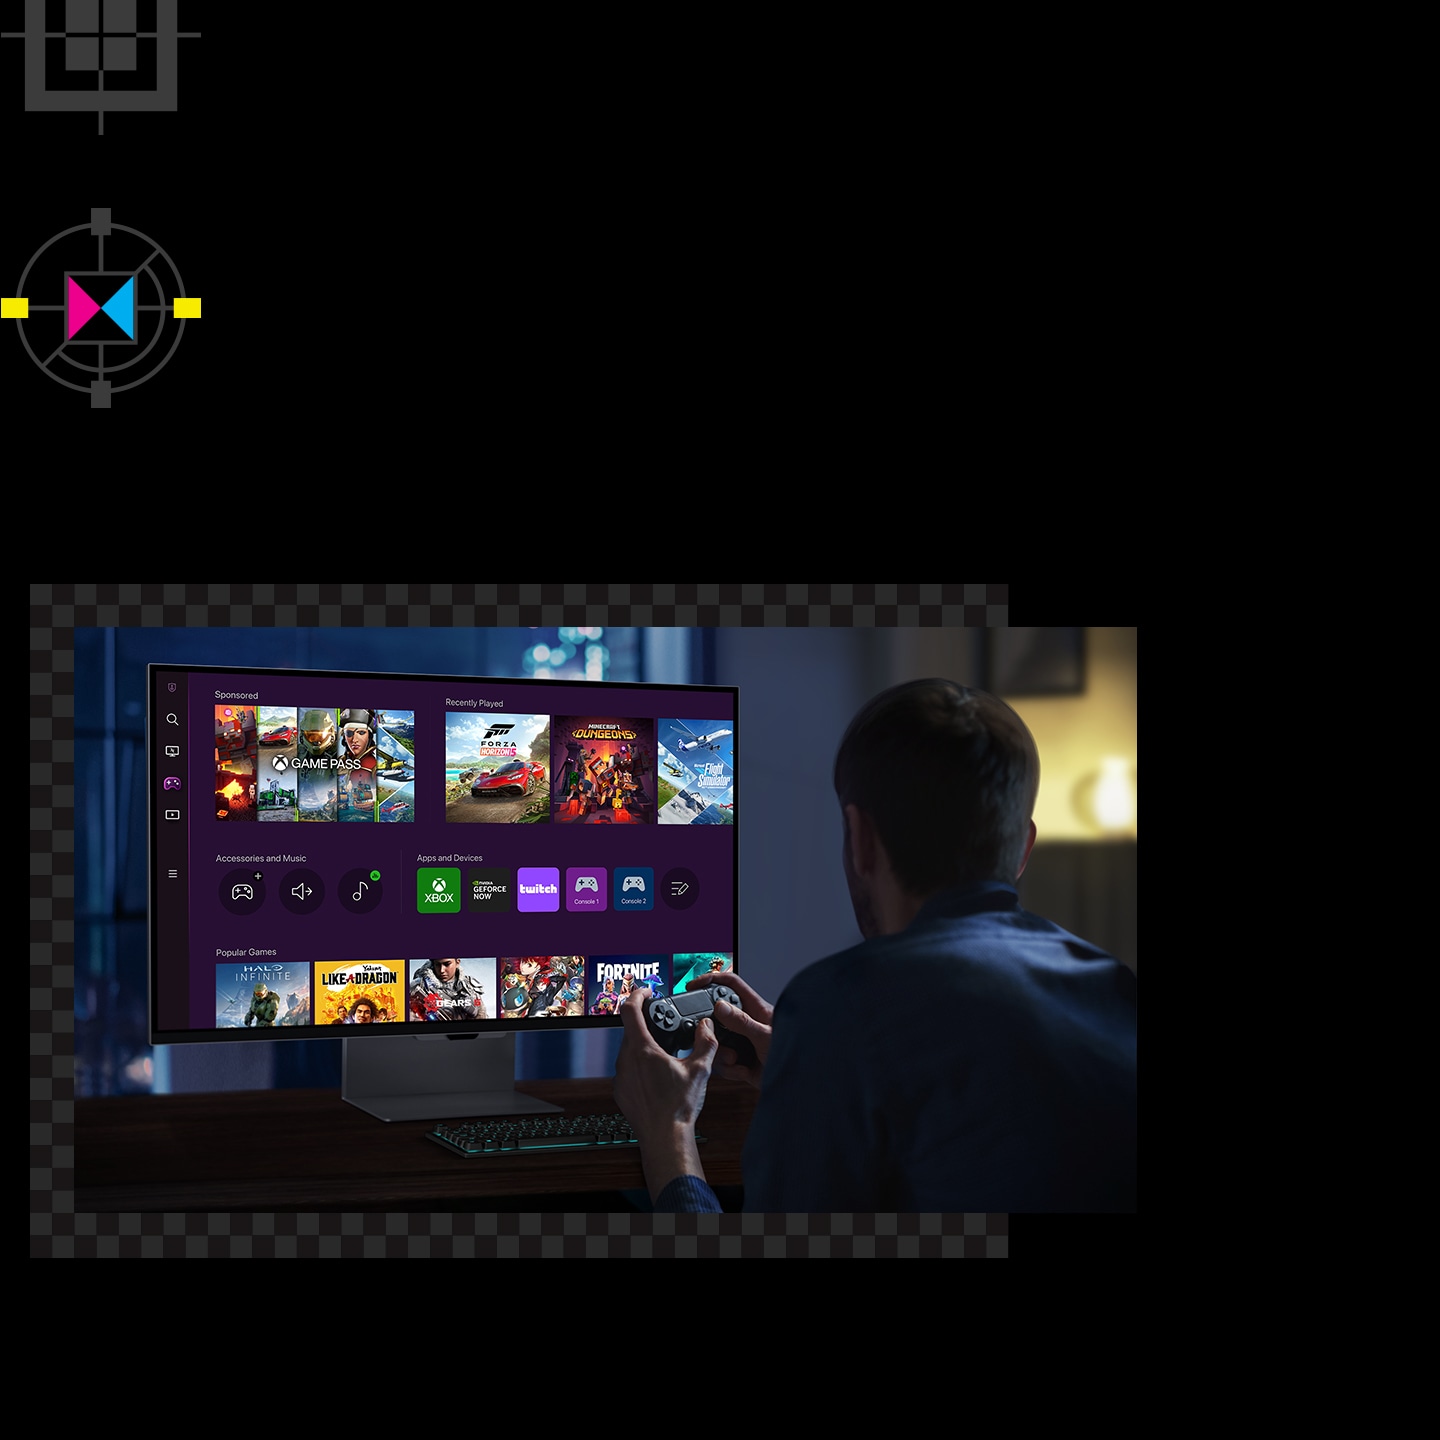 There is a man and a monitor. On the monitor, the Gaming Hub UI is shown. And the man in front of the monitor is holding a game controller.